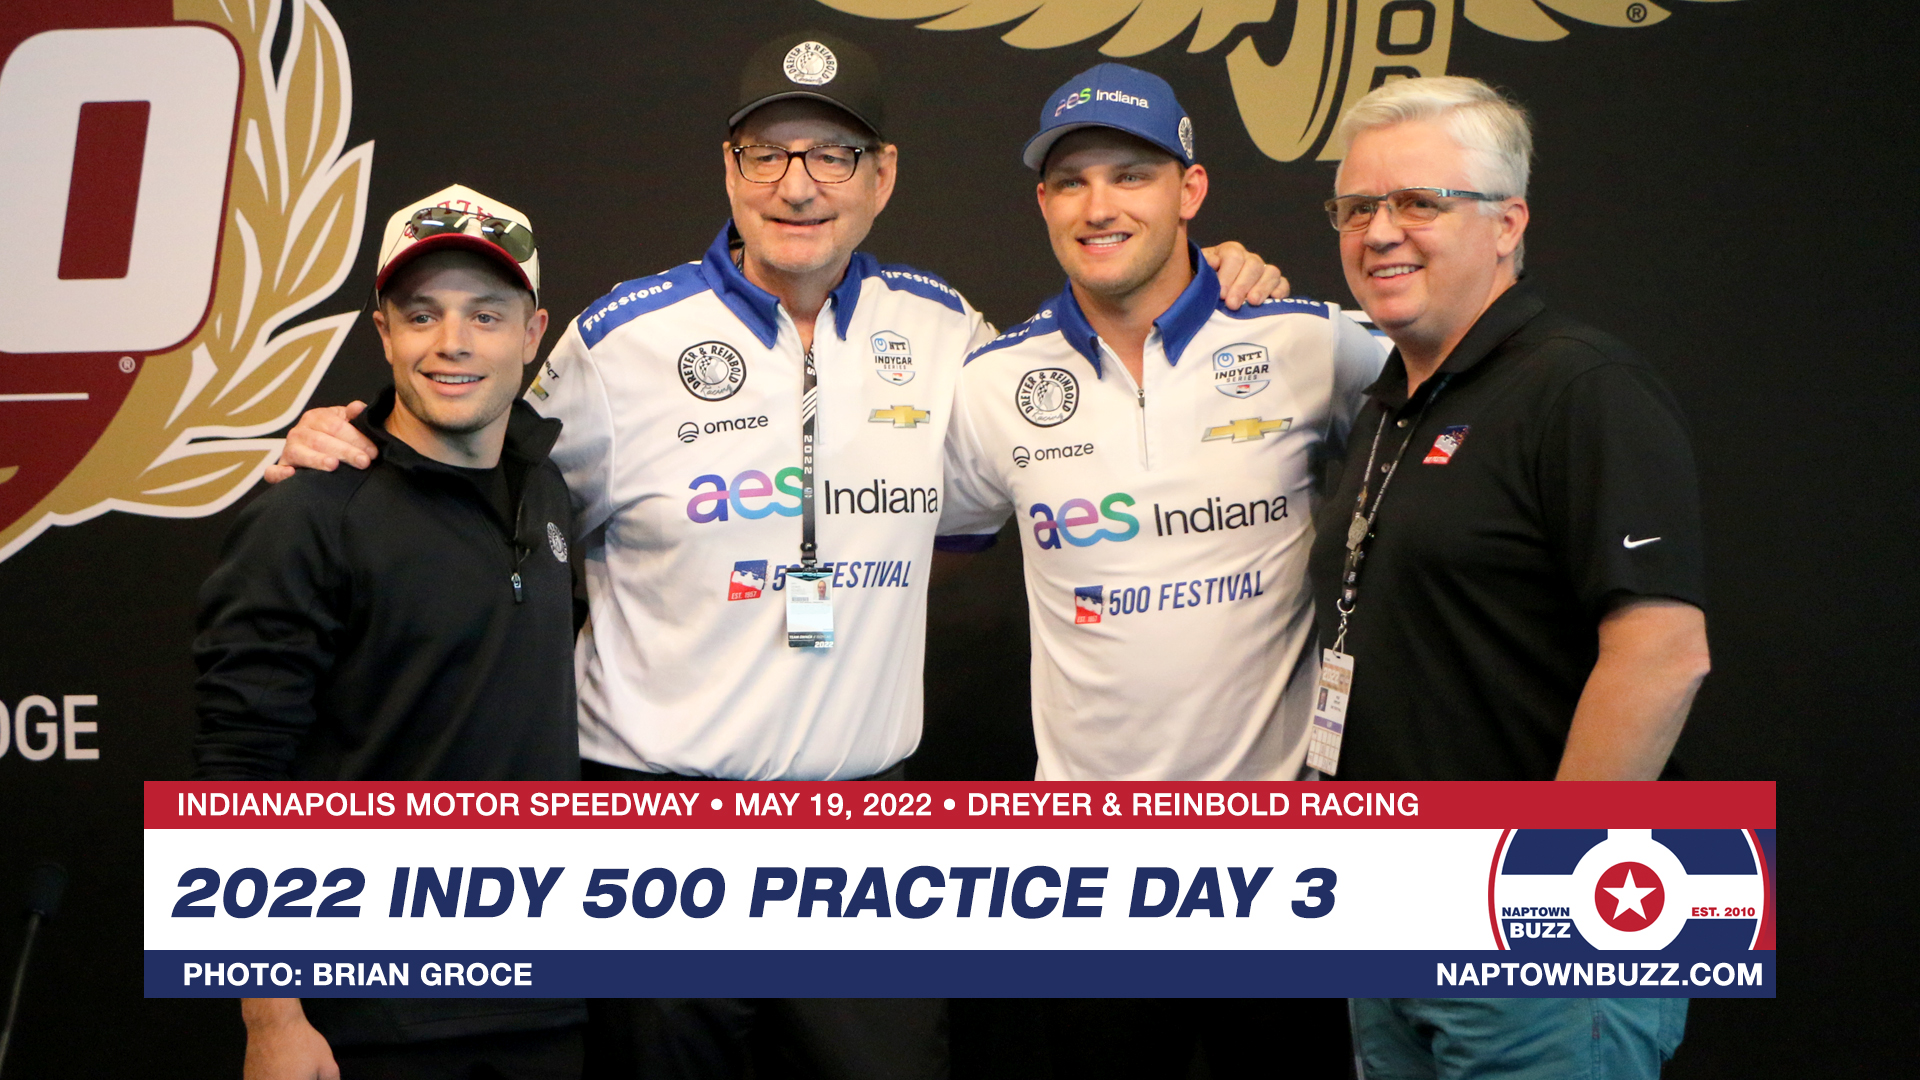 Dreyer & Reinbold Racing on Indy 500 Practice Day 3 at Indianapolis Motor Speedway on May 19, 2022